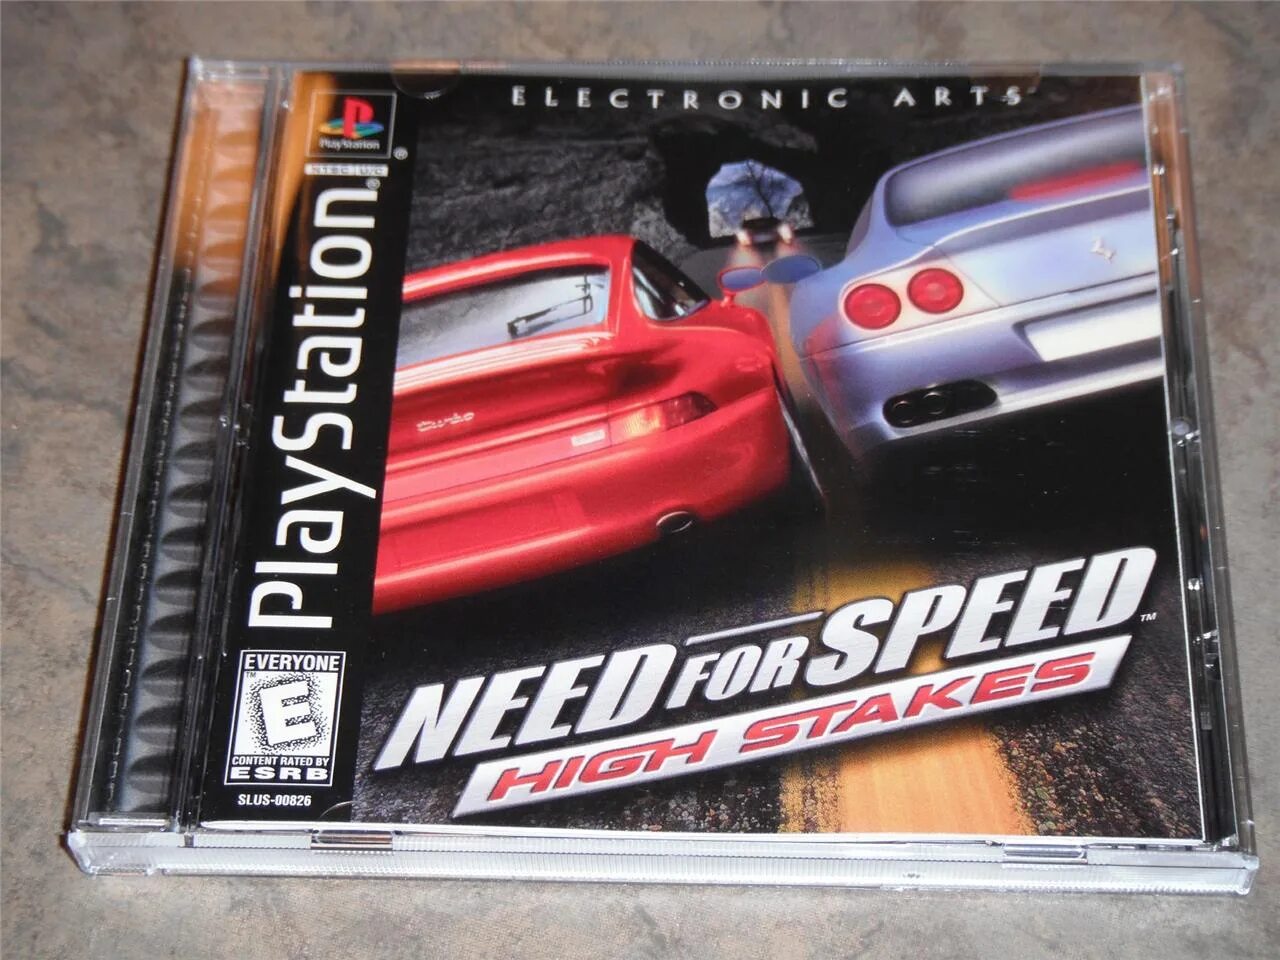 PLAYSTATION 1 диск need for Speed High stakes. Need for Speed High stakes ps1. NFS 4 High stakes ps1. NFS High stakes ps1 обложка. High stakes 4